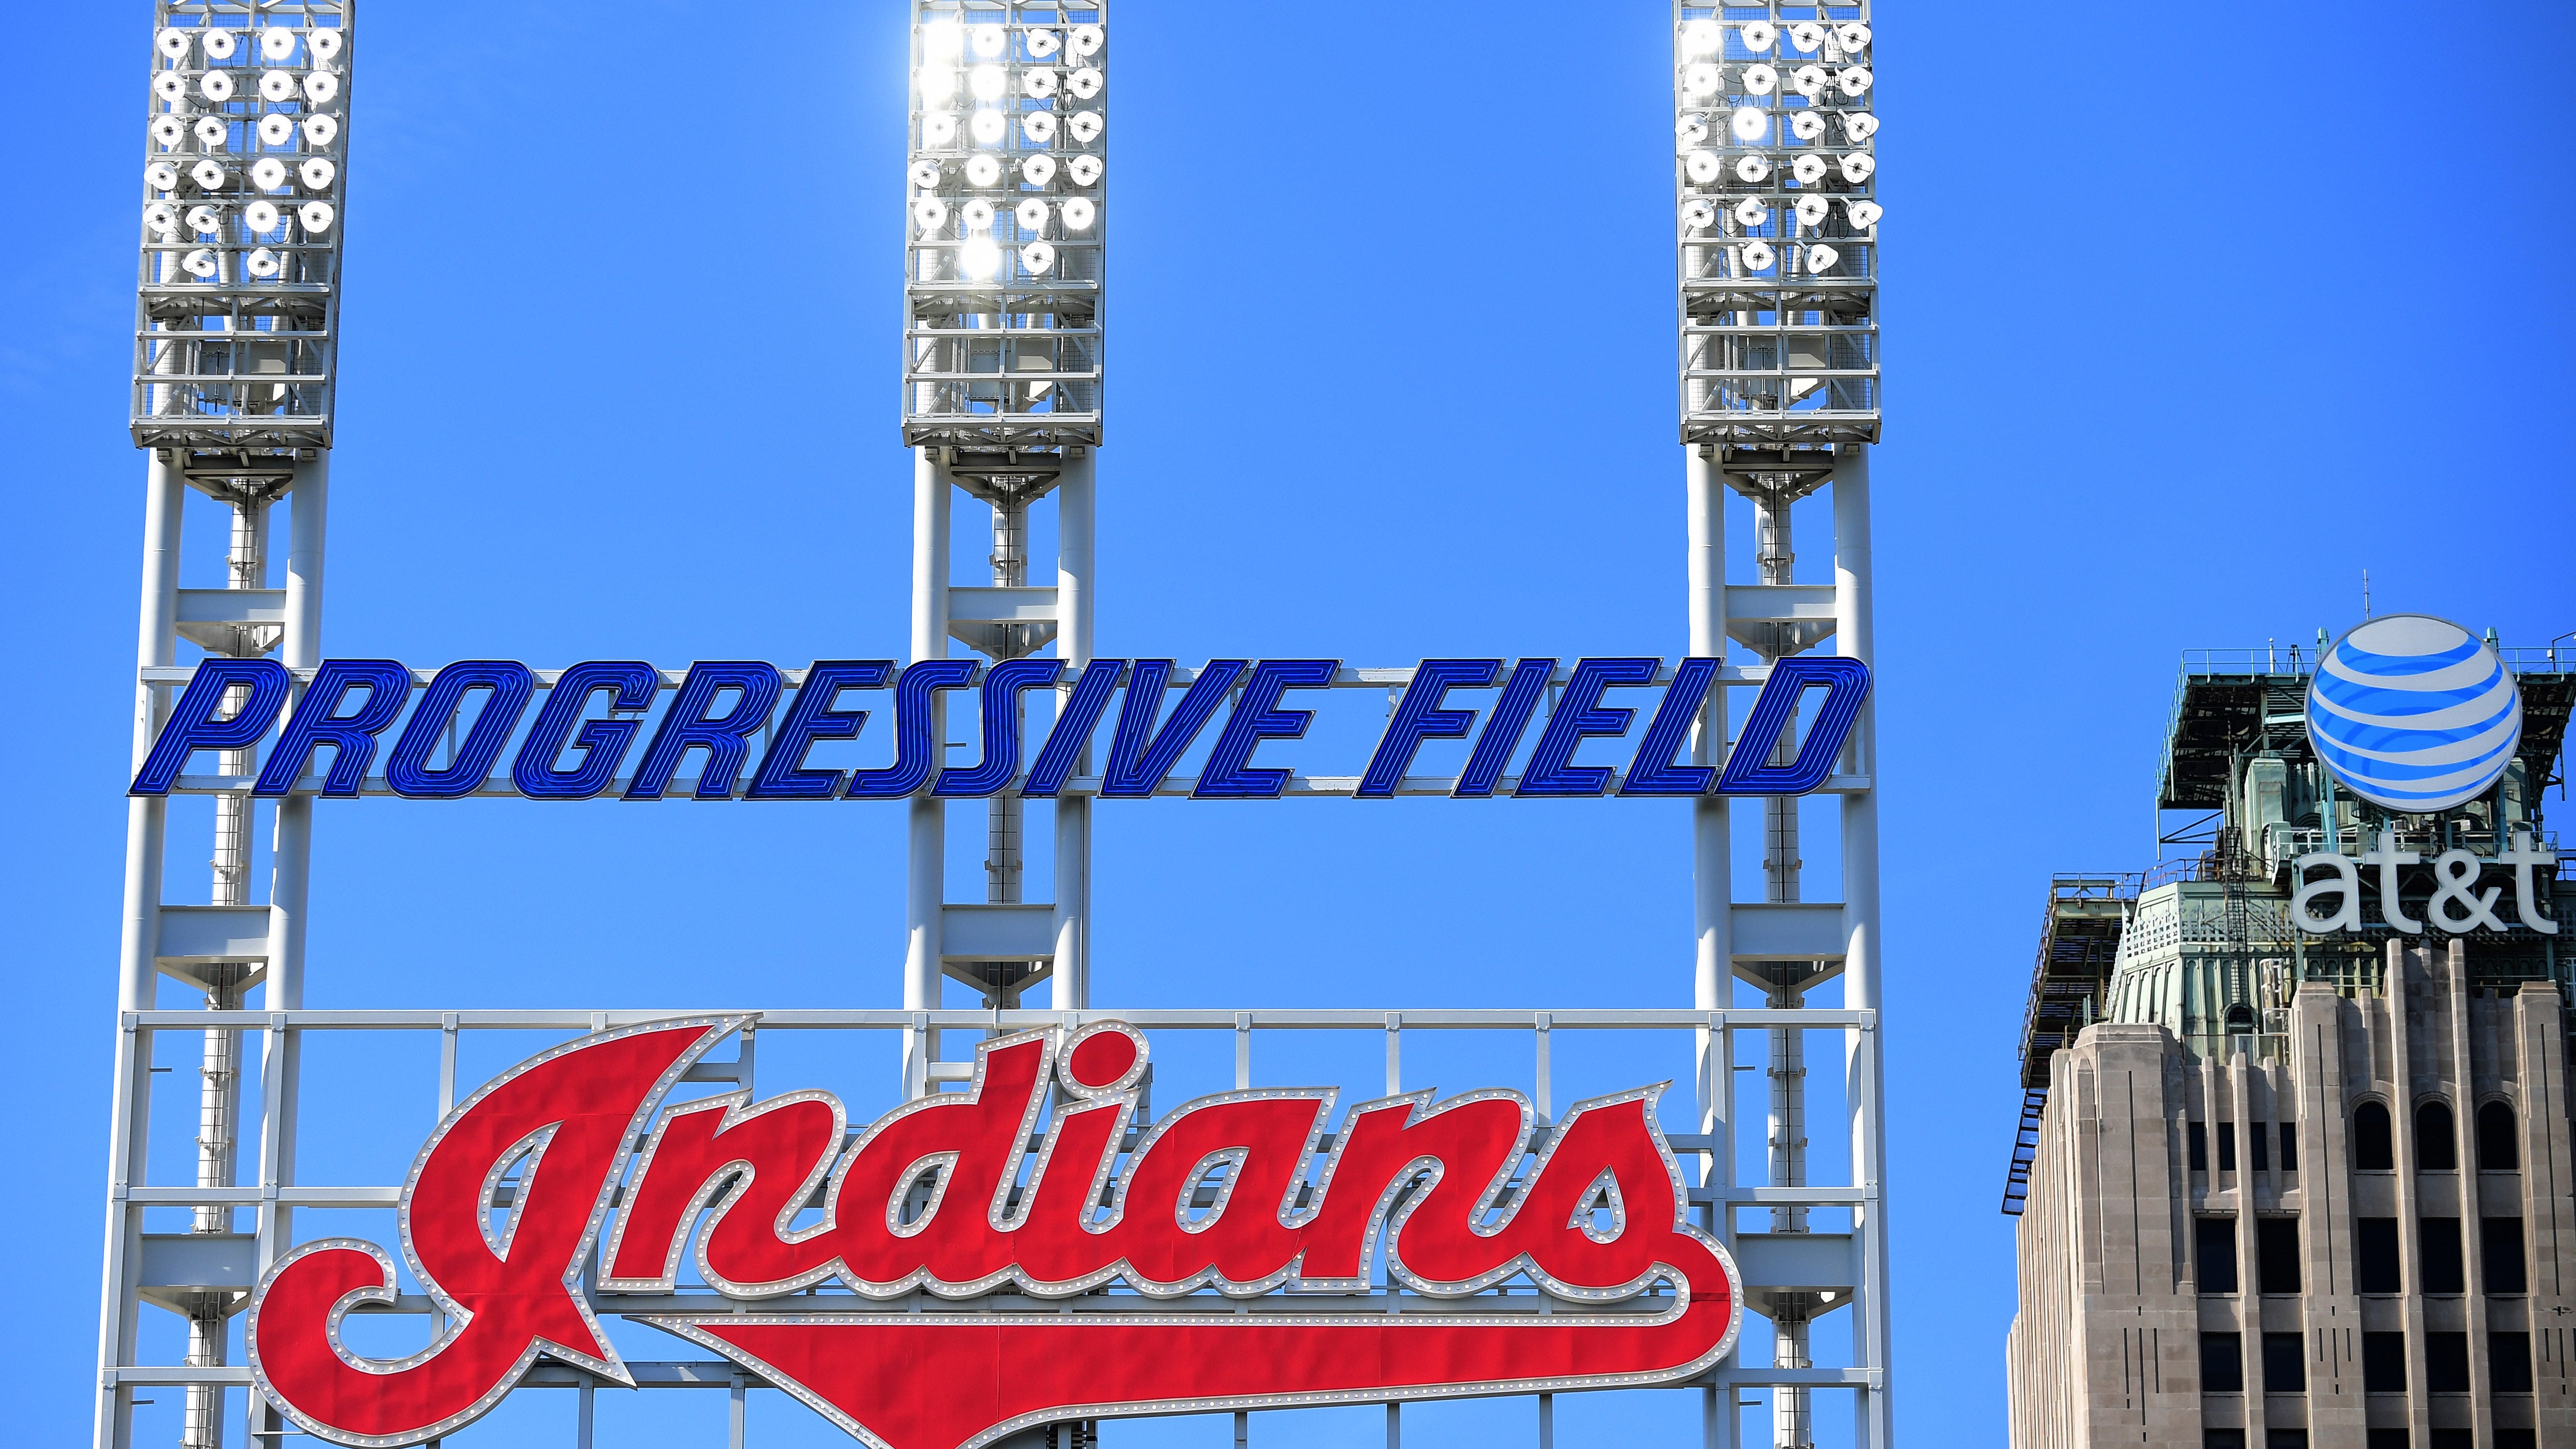 Cleveland Indians to use Guardians name after settling suit